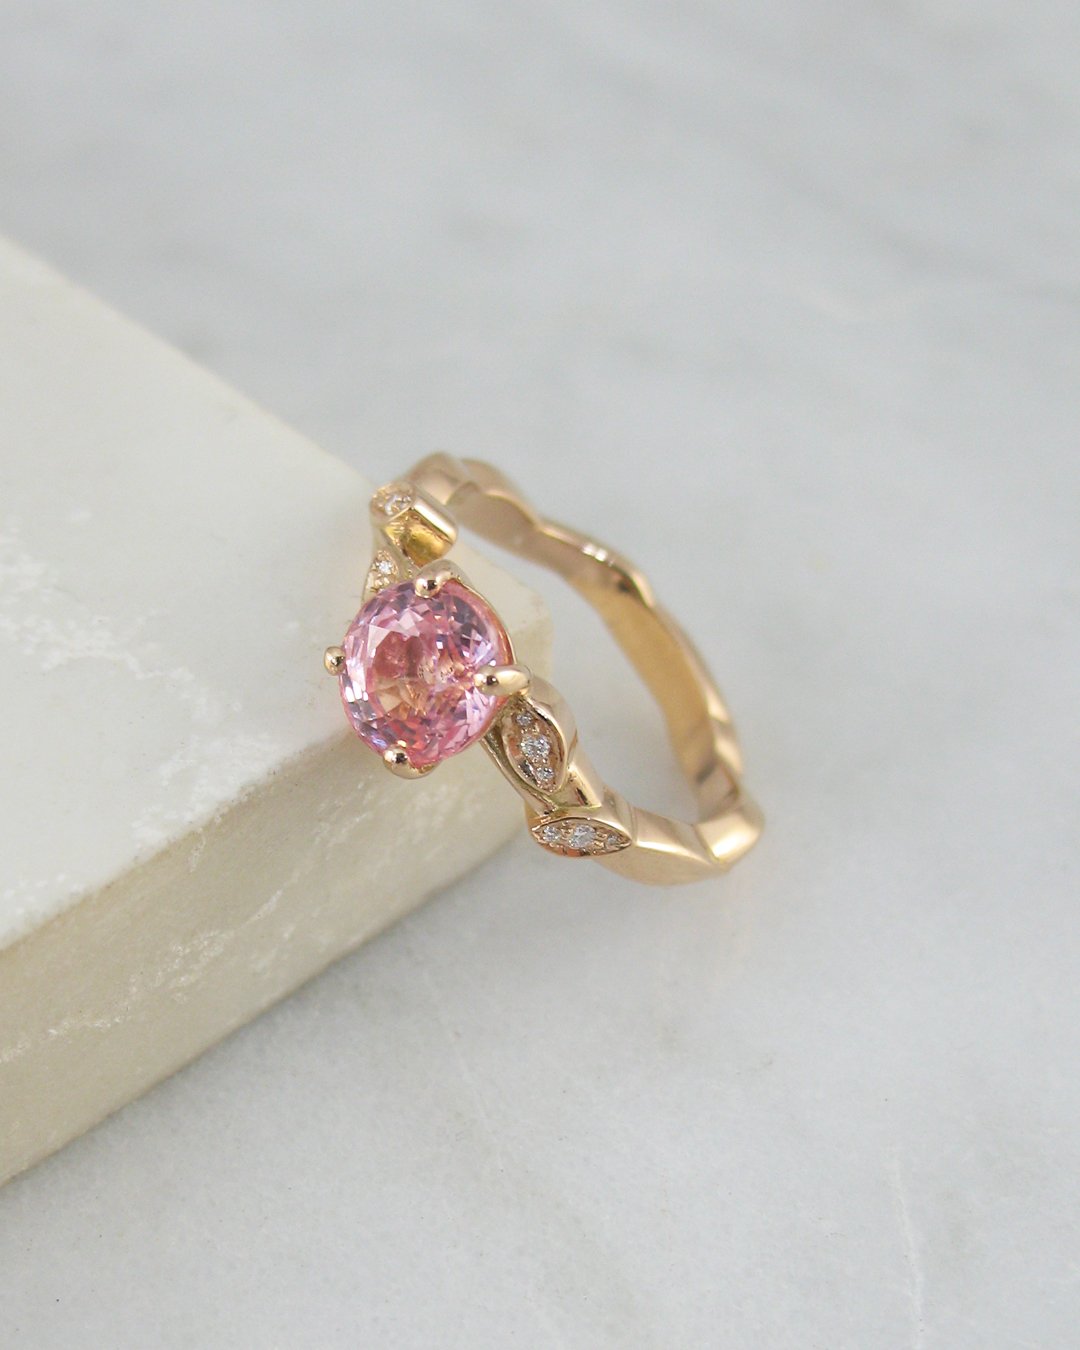 A stunning natural oval Padparadscha sapphire engagement ring